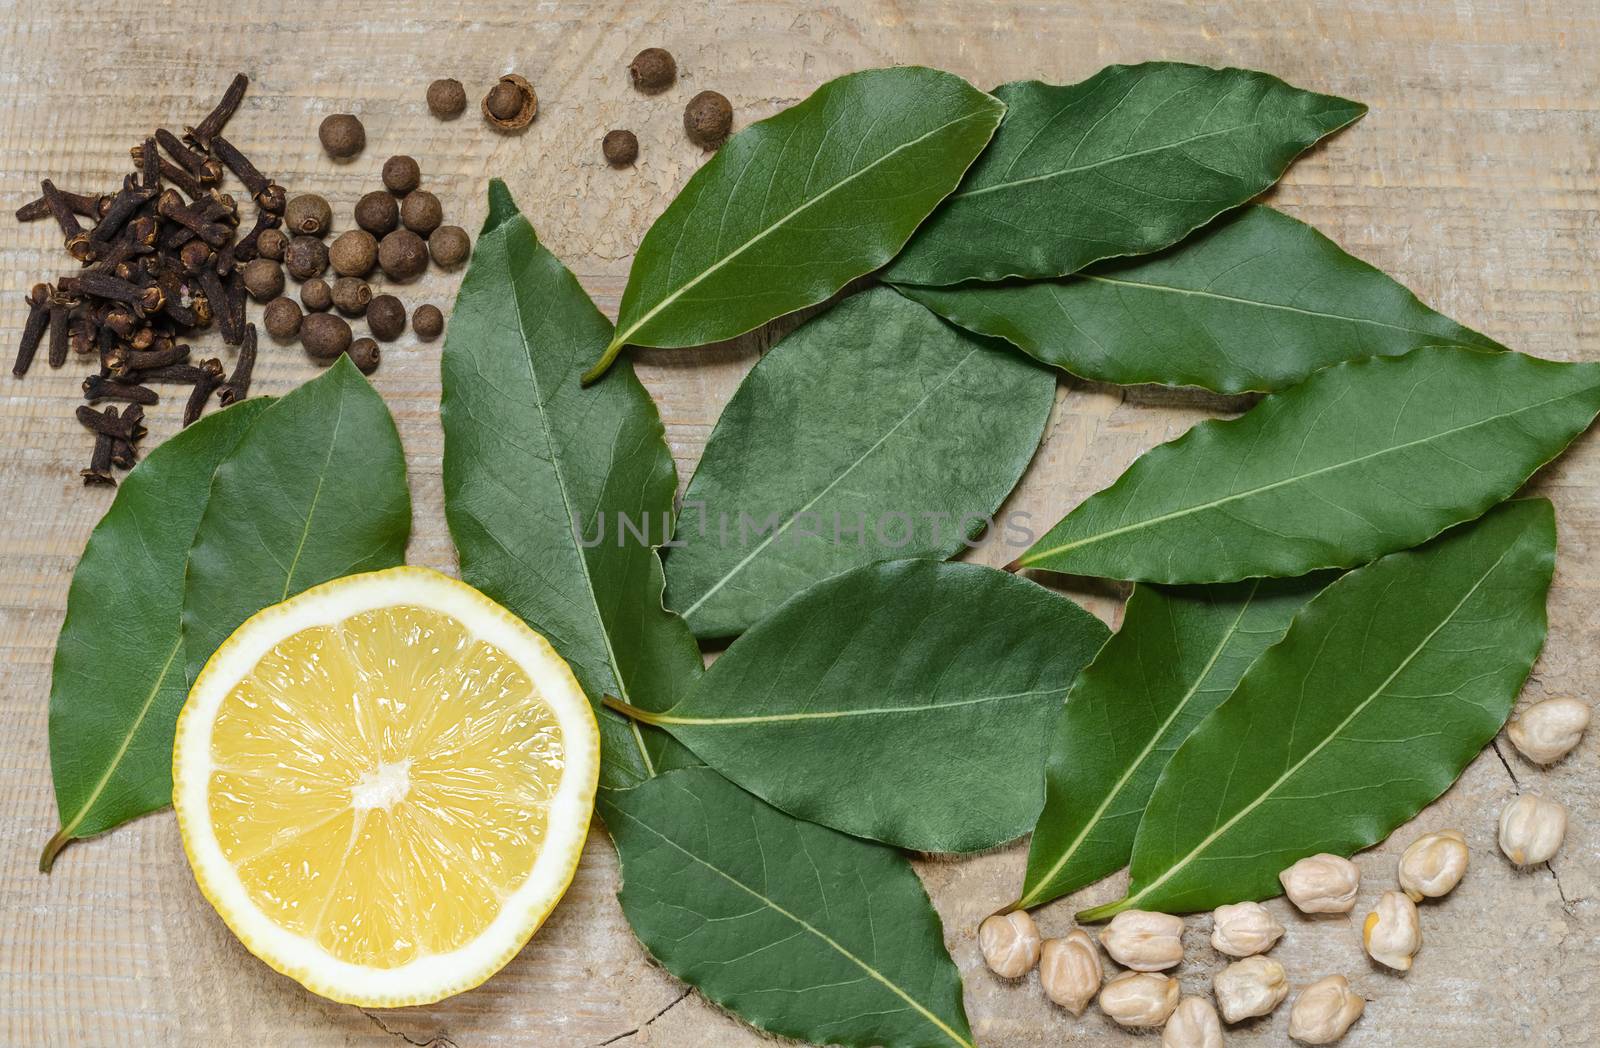 Half a lemon, Bay leaf, spices, lying on the old Board by Gaina